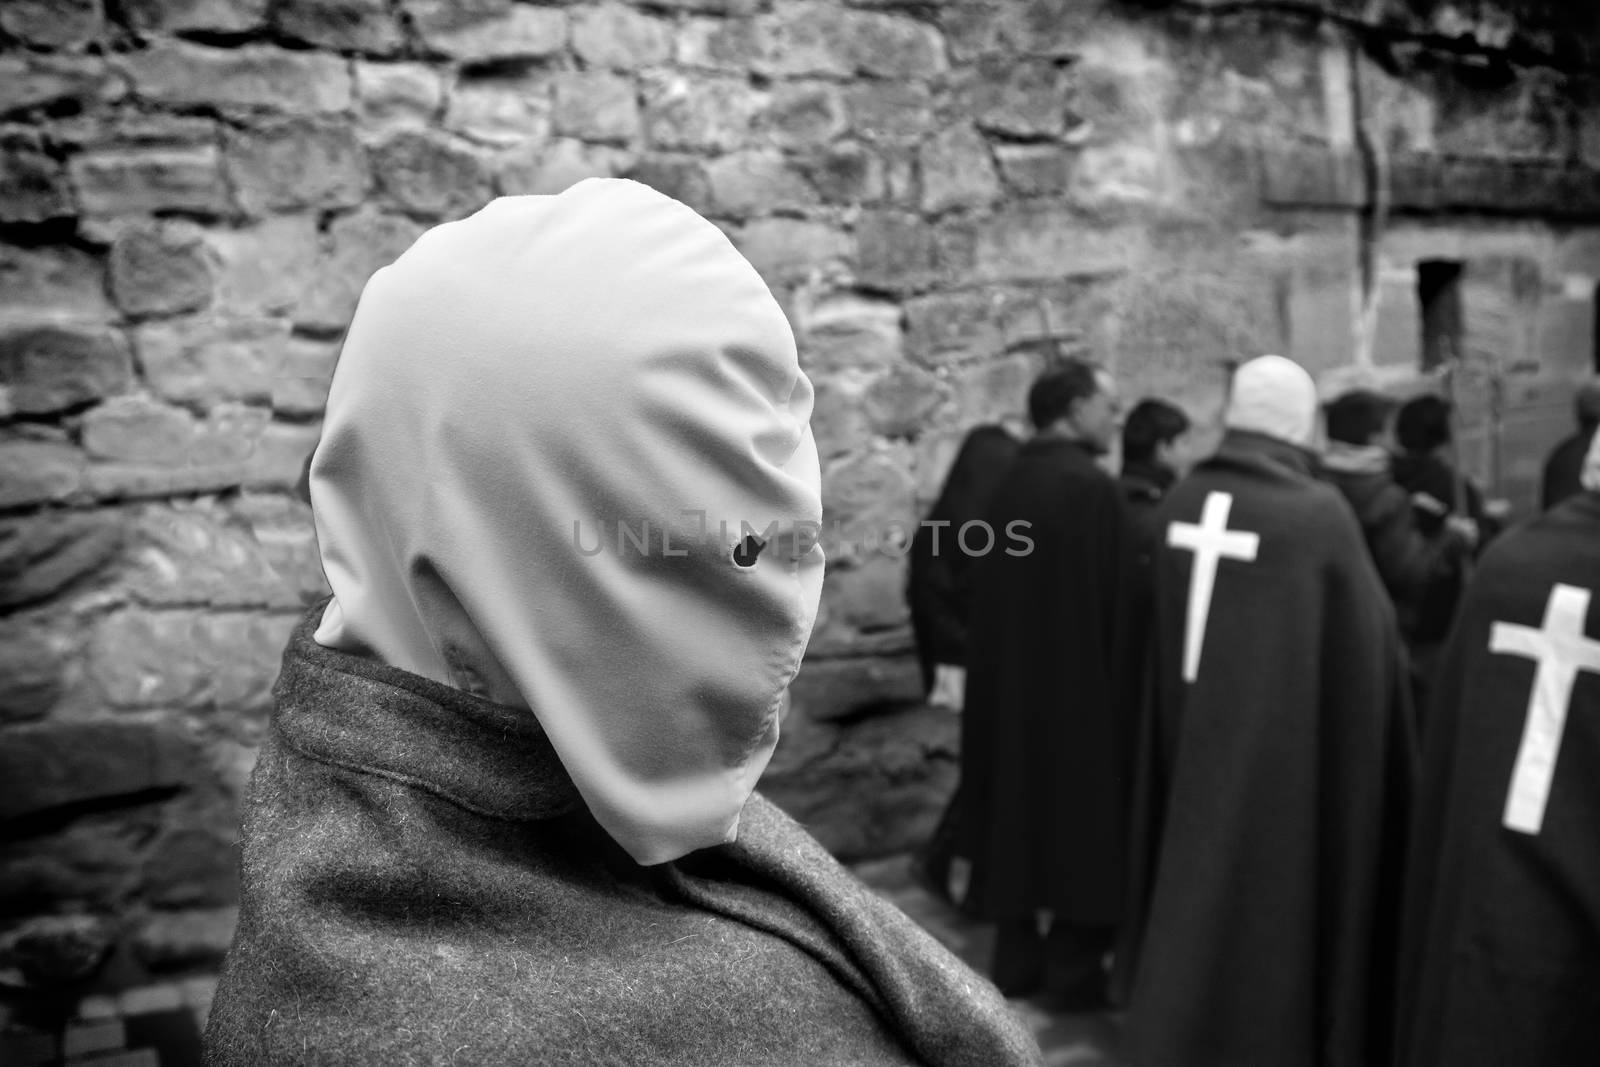 SAN VICENTE DE LA SONSIERRA, SPAIN - GOOD FRIDAY FRIDAY APRIL 6: Man does penance through self-flagellation during Easter holy procession on April 6, 2012, San Vicente de la Sonsierra, Spain. by esebene